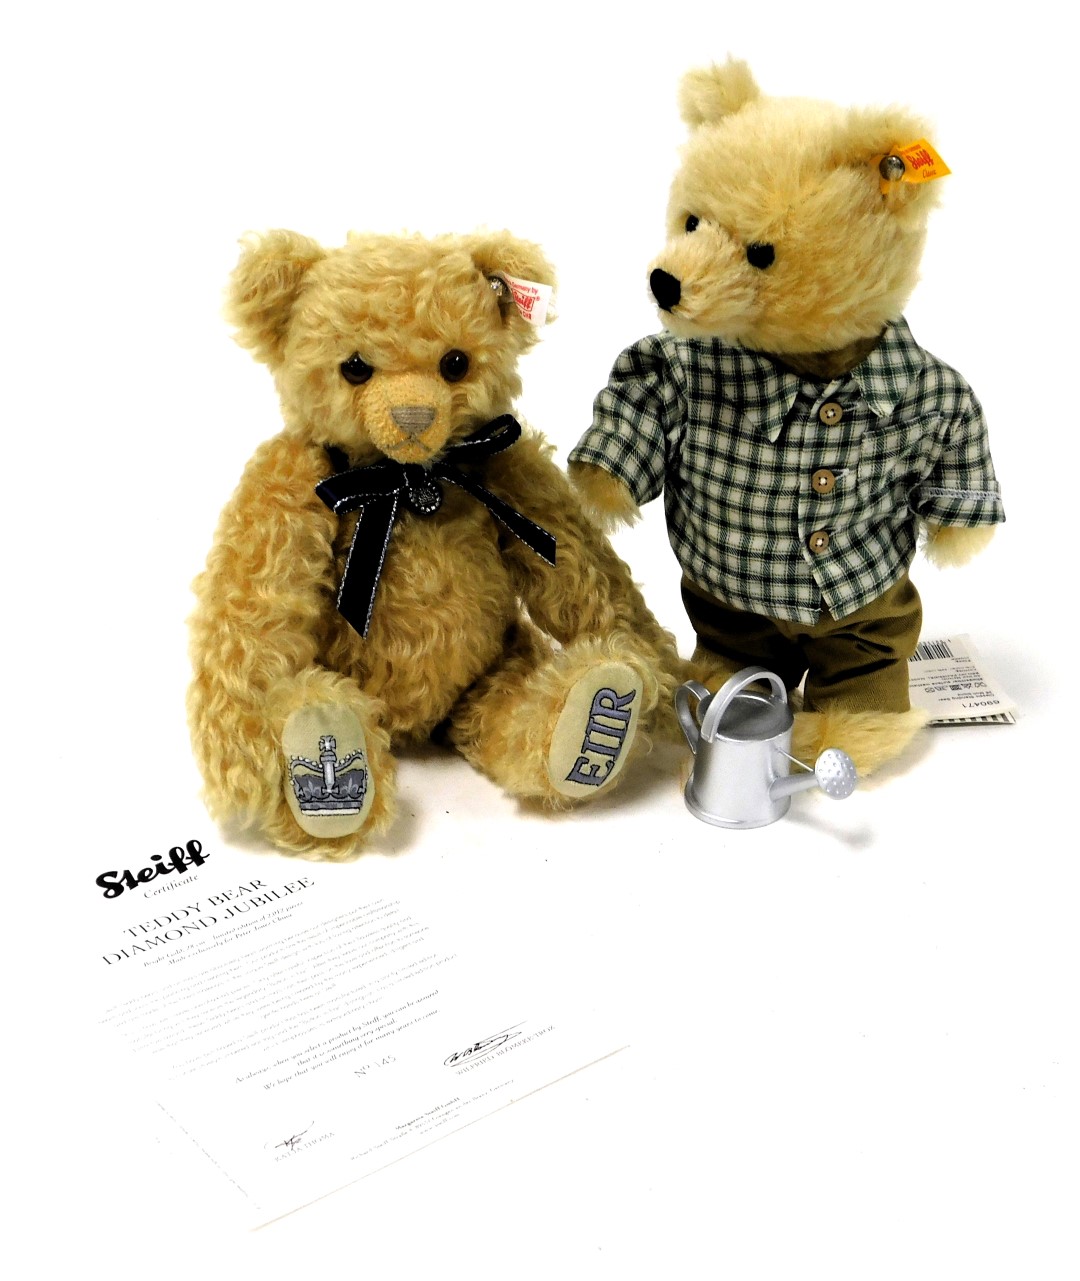 A Steiff diamond jubilee teddy bear 2012, with certificate, and a Steiff classic standing bear with